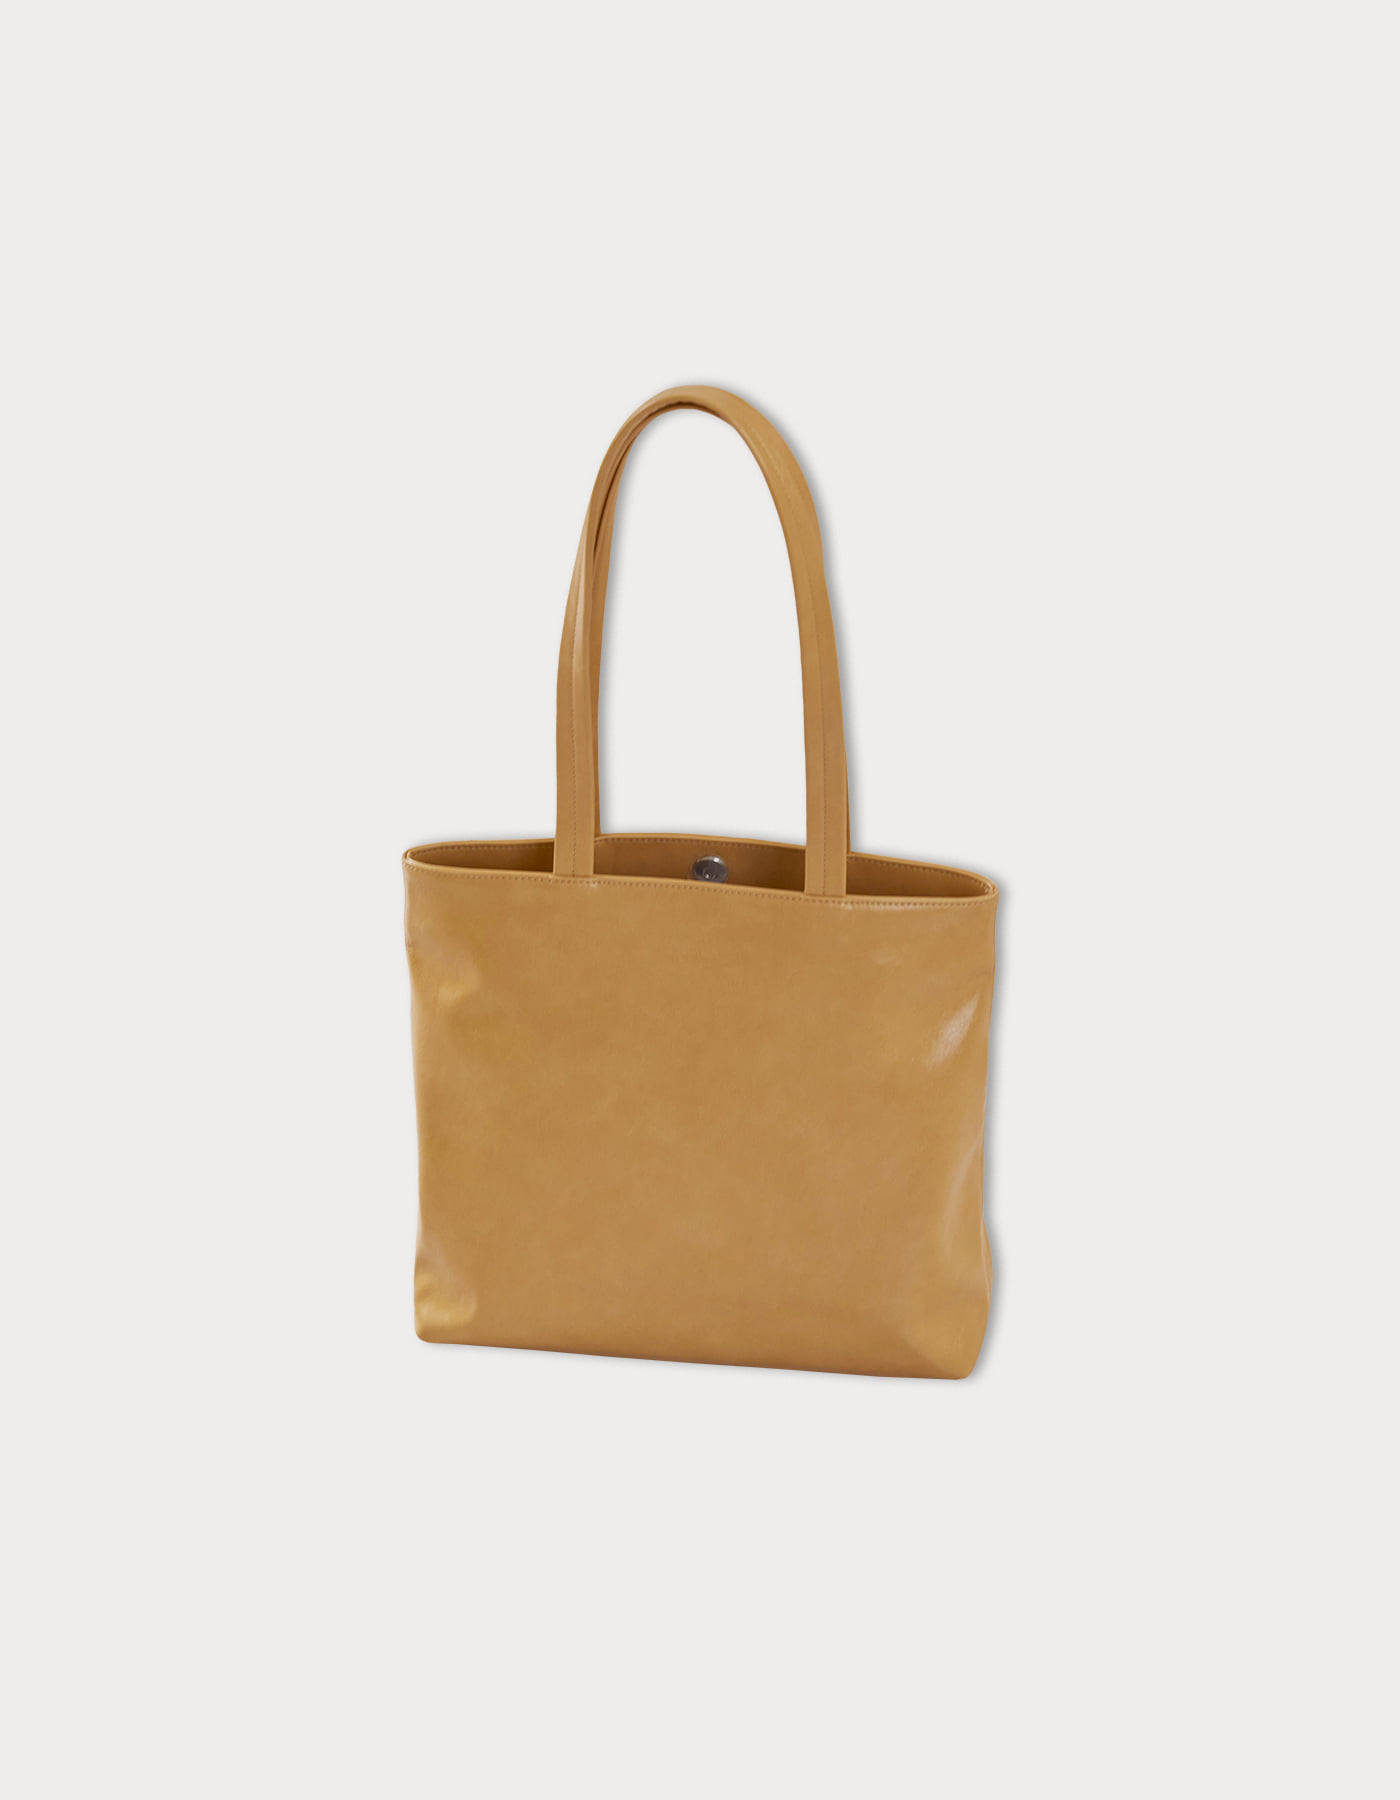 grand toast bag - butter yellow